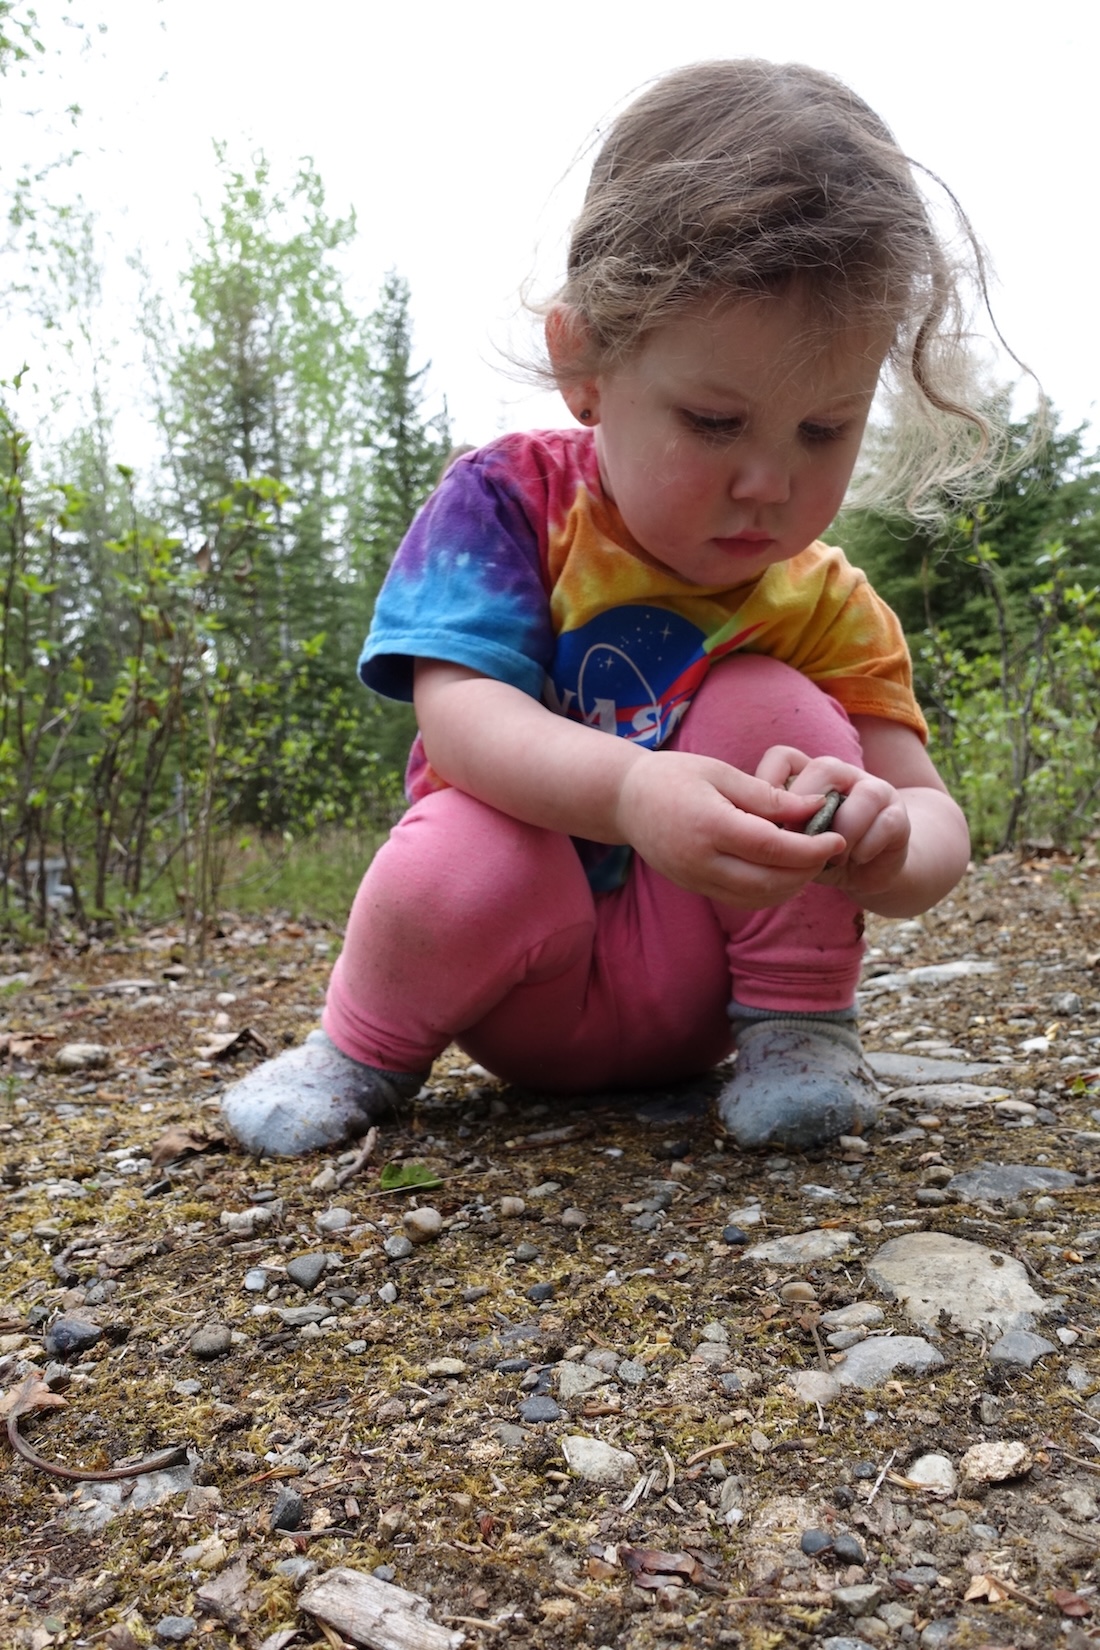 A 2-year-old girl in a multicolored shirt and pink pants picks up rocks from the ground.